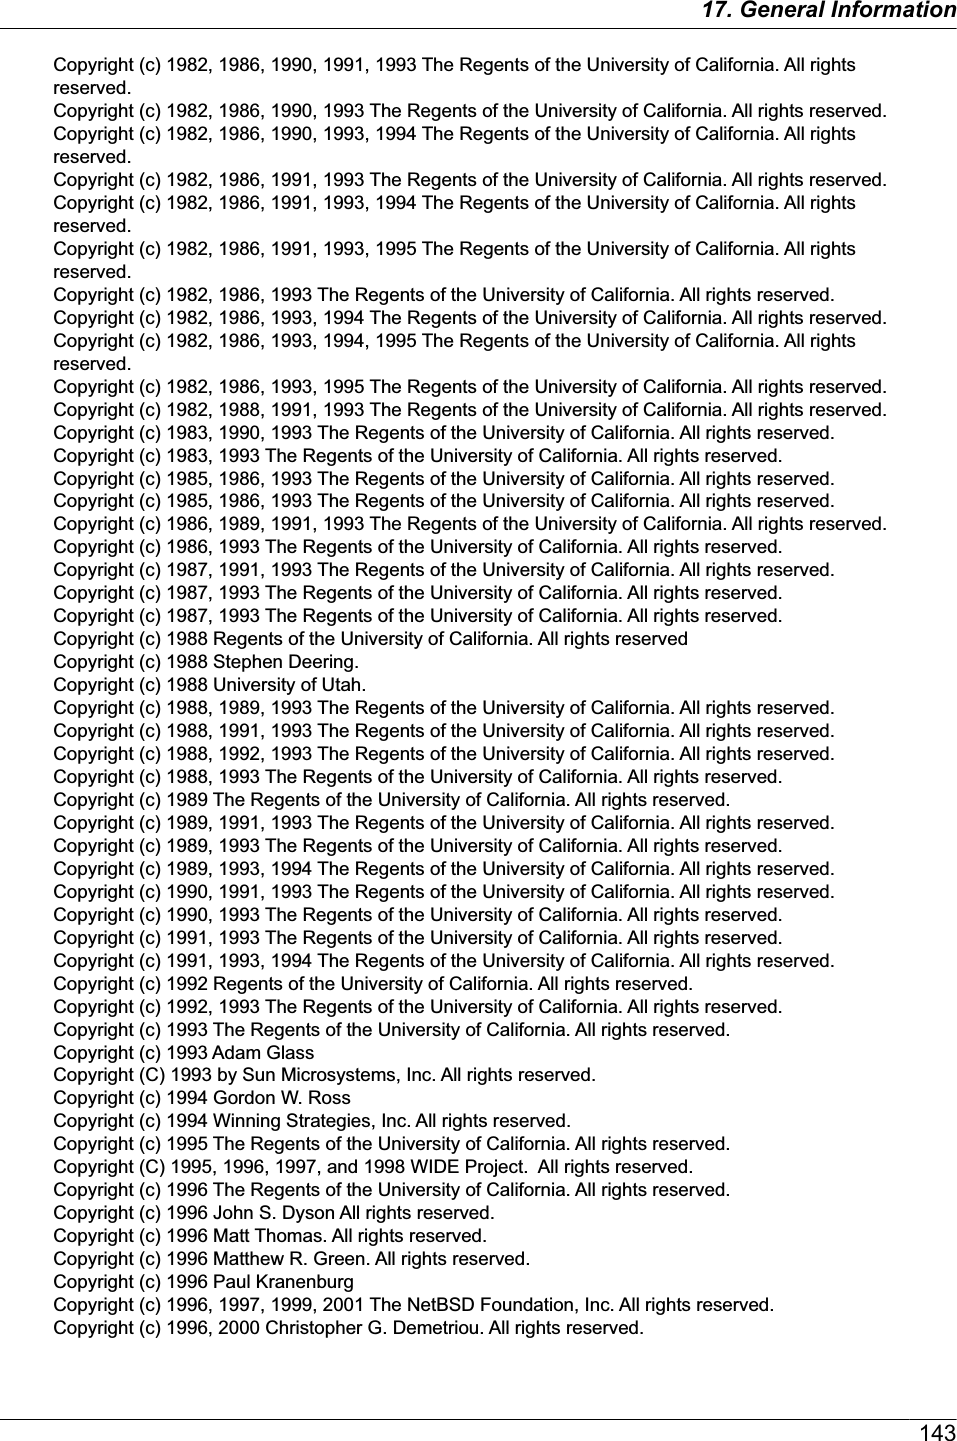 Copyright (c) 1982, 1986, 1990, 1991, 1993 The Regents of the University of California. All rights reserved.Copyright (c) 1982, 1986, 1990, 1993 The Regents of the University of California. All rights reserved.Copyright (c) 1982, 1986, 1990, 1993, 1994 The Regents of the University of California. All rights reserved.Copyright (c) 1982, 1986, 1991, 1993 The Regents of the University of California. All rights reserved.Copyright (c) 1982, 1986, 1991, 1993, 1994 The Regents of the University of California. All rights reserved.Copyright (c) 1982, 1986, 1991, 1993, 1995 The Regents of the University of California. All rights reserved.Copyright (c) 1982, 1986, 1993 The Regents of the University of California. All rights reserved.Copyright (c) 1982, 1986, 1993, 1994 The Regents of the University of California. All rights reserved.Copyright (c) 1982, 1986, 1993, 1994, 1995 The Regents of the University of California. All rights reserved.Copyright (c) 1982, 1986, 1993, 1995 The Regents of the University of California. All rights reserved.Copyright (c) 1982, 1988, 1991, 1993 The Regents of the University of California. All rights reserved.Copyright (c) 1983, 1990, 1993 The Regents of the University of California. All rights reserved.Copyright (c) 1983, 1993 The Regents of the University of California. All rights reserved.Copyright (c) 1985, 1986, 1993 The Regents of the University of California. All rights reserved.Copyright (c) 1985, 1986, 1993 The Regents of the University of California. All rights reserved.Copyright (c) 1986, 1989, 1991, 1993 The Regents of the University of California. All rights reserved.Copyright (c) 1986, 1993 The Regents of the University of California. All rights reserved.Copyright (c) 1987, 1991, 1993 The Regents of the University of California. All rights reserved.Copyright (c) 1987, 1993 The Regents of the University of California. All rights reserved.Copyright (c) 1987, 1993 The Regents of the University of California. All rights reserved.Copyright (c) 1988 Regents of the University of California. All rights reserved Copyright (c) 1988 Stephen Deering.Copyright (c) 1988 University of Utah.Copyright (c) 1988, 1989, 1993 The Regents of the University of California. All rights reserved.Copyright (c) 1988, 1991, 1993 The Regents of the University of California. All rights reserved.Copyright (c) 1988, 1992, 1993 The Regents of the University of California. All rights reserved.Copyright (c) 1988, 1993 The Regents of the University of California. All rights reserved.Copyright (c) 1989 The Regents of the University of California. All rights reserved.Copyright (c) 1989, 1991, 1993 The Regents of the University of California. All rights reserved.Copyright (c) 1989, 1993 The Regents of the University of California. All rights reserved.Copyright (c) 1989, 1993, 1994 The Regents of the University of California. All rights reserved.Copyright (c) 1990, 1991, 1993 The Regents of the University of California. All rights reserved.Copyright (c) 1990, 1993 The Regents of the University of California. All rights reserved.Copyright (c) 1991, 1993 The Regents of the University of California. All rights reserved.Copyright (c) 1991, 1993, 1994 The Regents of the University of California. All rights reserved.Copyright (c) 1992 Regents of the University of California. All rights reserved.Copyright (c) 1992, 1993 The Regents of the University of California. All rights reserved.Copyright (c) 1993 The Regents of the University of California. All rights reserved.Copyright (c) 1993 Adam Glass Copyright (C) 1993 by Sun Microsystems, Inc. All rights reserved.Copyright (c) 1994 Gordon W. Ross Copyright (c) 1994 Winning Strategies, Inc. All rights reserved.Copyright (c) 1995 The Regents of the University of California. All rights reserved.Copyright (C) 1995, 1996, 1997, and 1998 WIDE Project.  All rights reserved.Copyright (c) 1996 The Regents of the University of California. All rights reserved.Copyright (c) 1996 John S. Dyson All rights reserved.Copyright (c) 1996 Matt Thomas. All rights reserved.Copyright (c) 1996 Matthew R. Green. All rights reserved.Copyright (c) 1996 Paul Kranenburg Copyright (c) 1996, 1997, 1999, 2001 The NetBSD Foundation, Inc. All rights reserved.Copyright (c) 1996, 2000 Christopher G. Demetriou. All rights reserved.14317. General Information